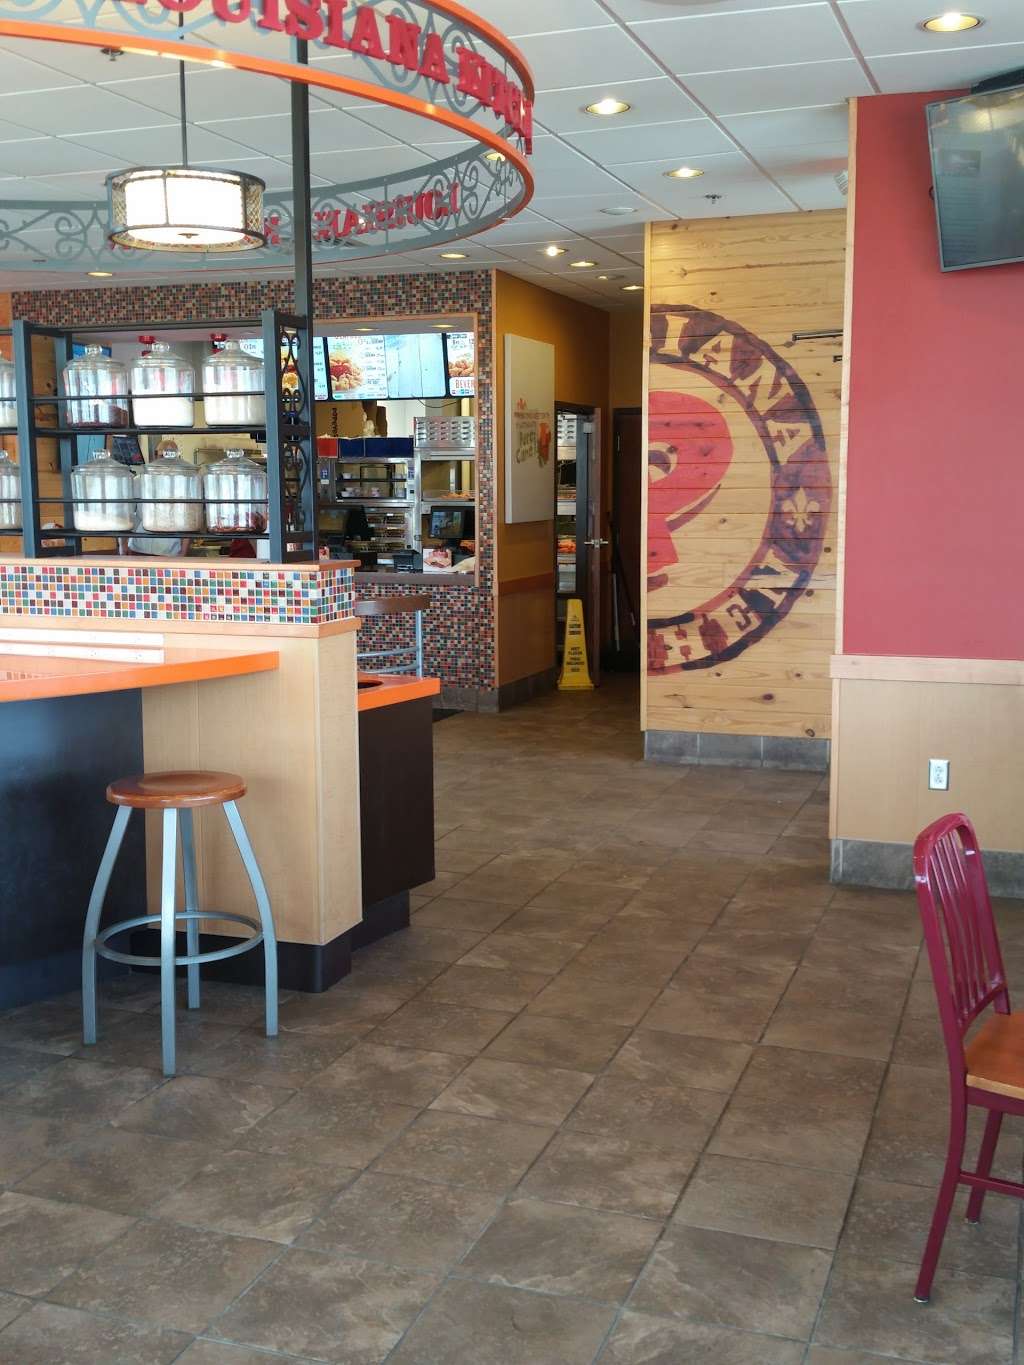 Popeyes Louisiana Kitchen | 5713 S Scatterfield Rd, Anderson, IN 46013 | Phone: (765) 622-4994